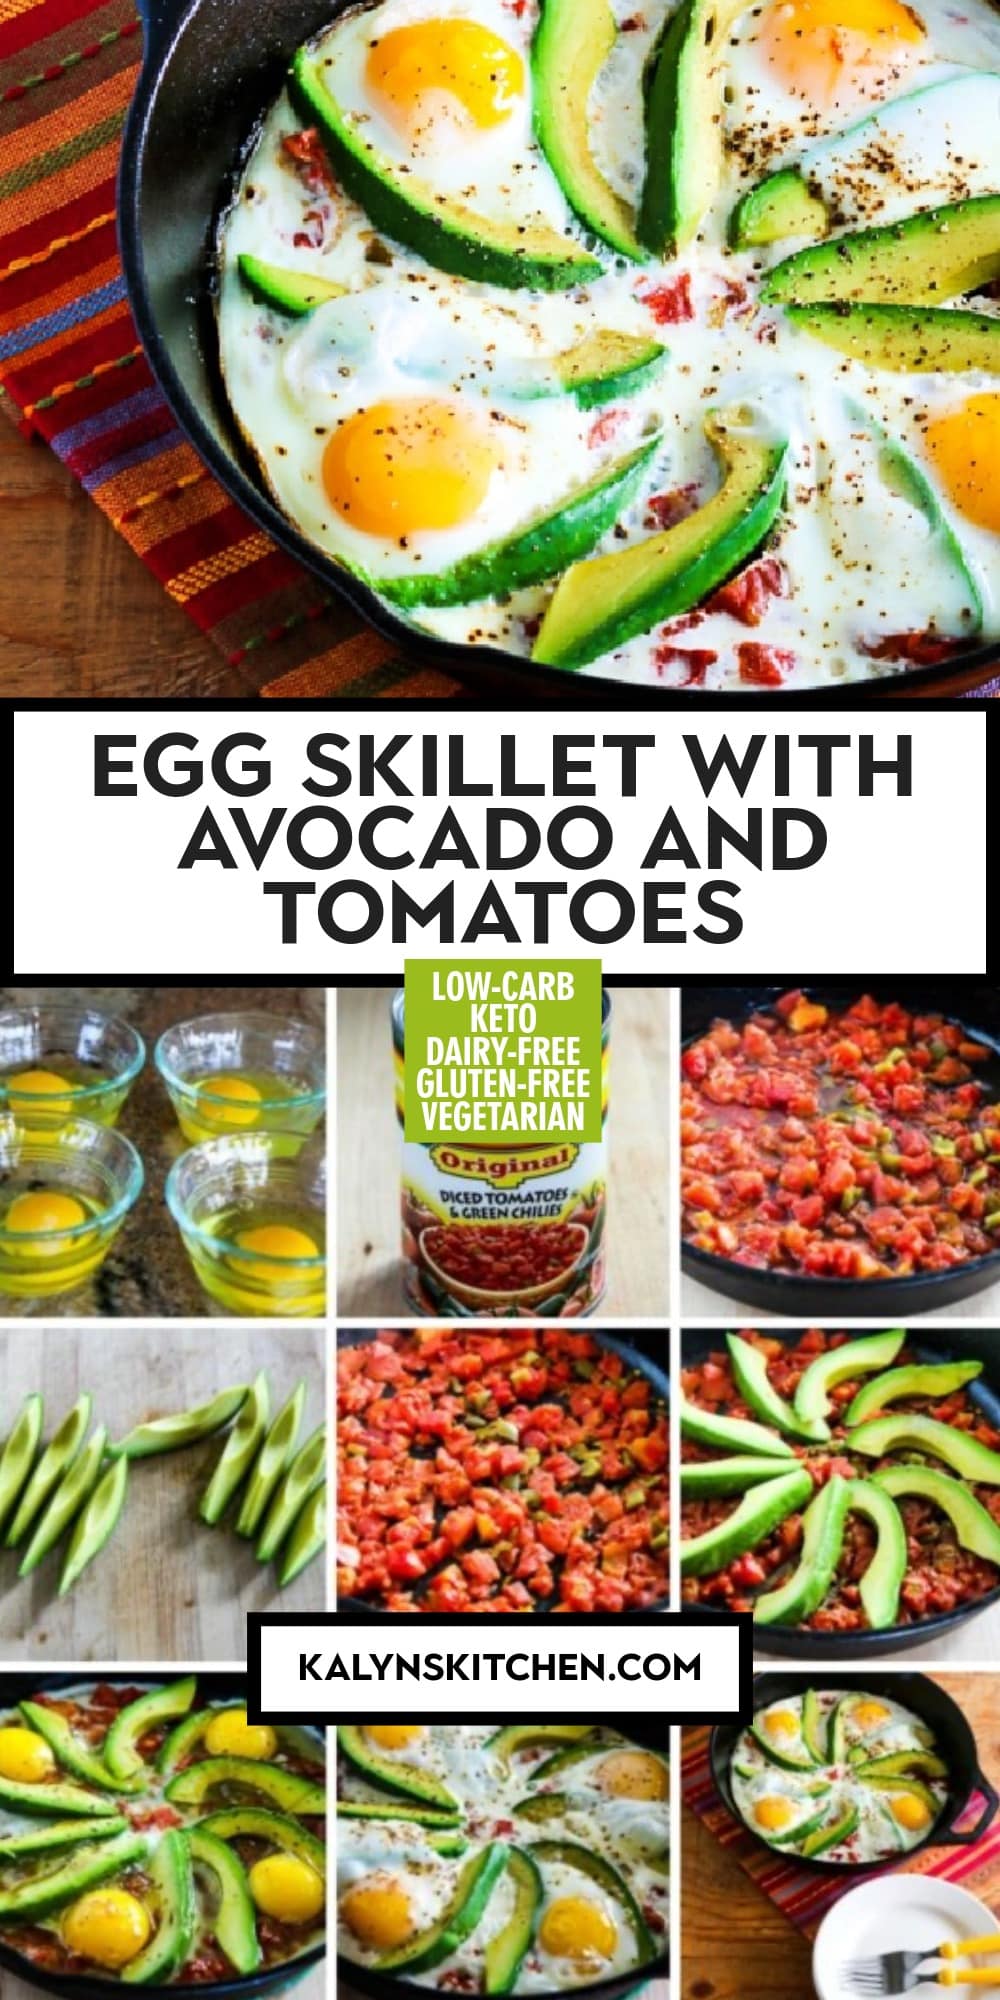 Pinterest image of Egg Skillet with Avocado and Tomatoes